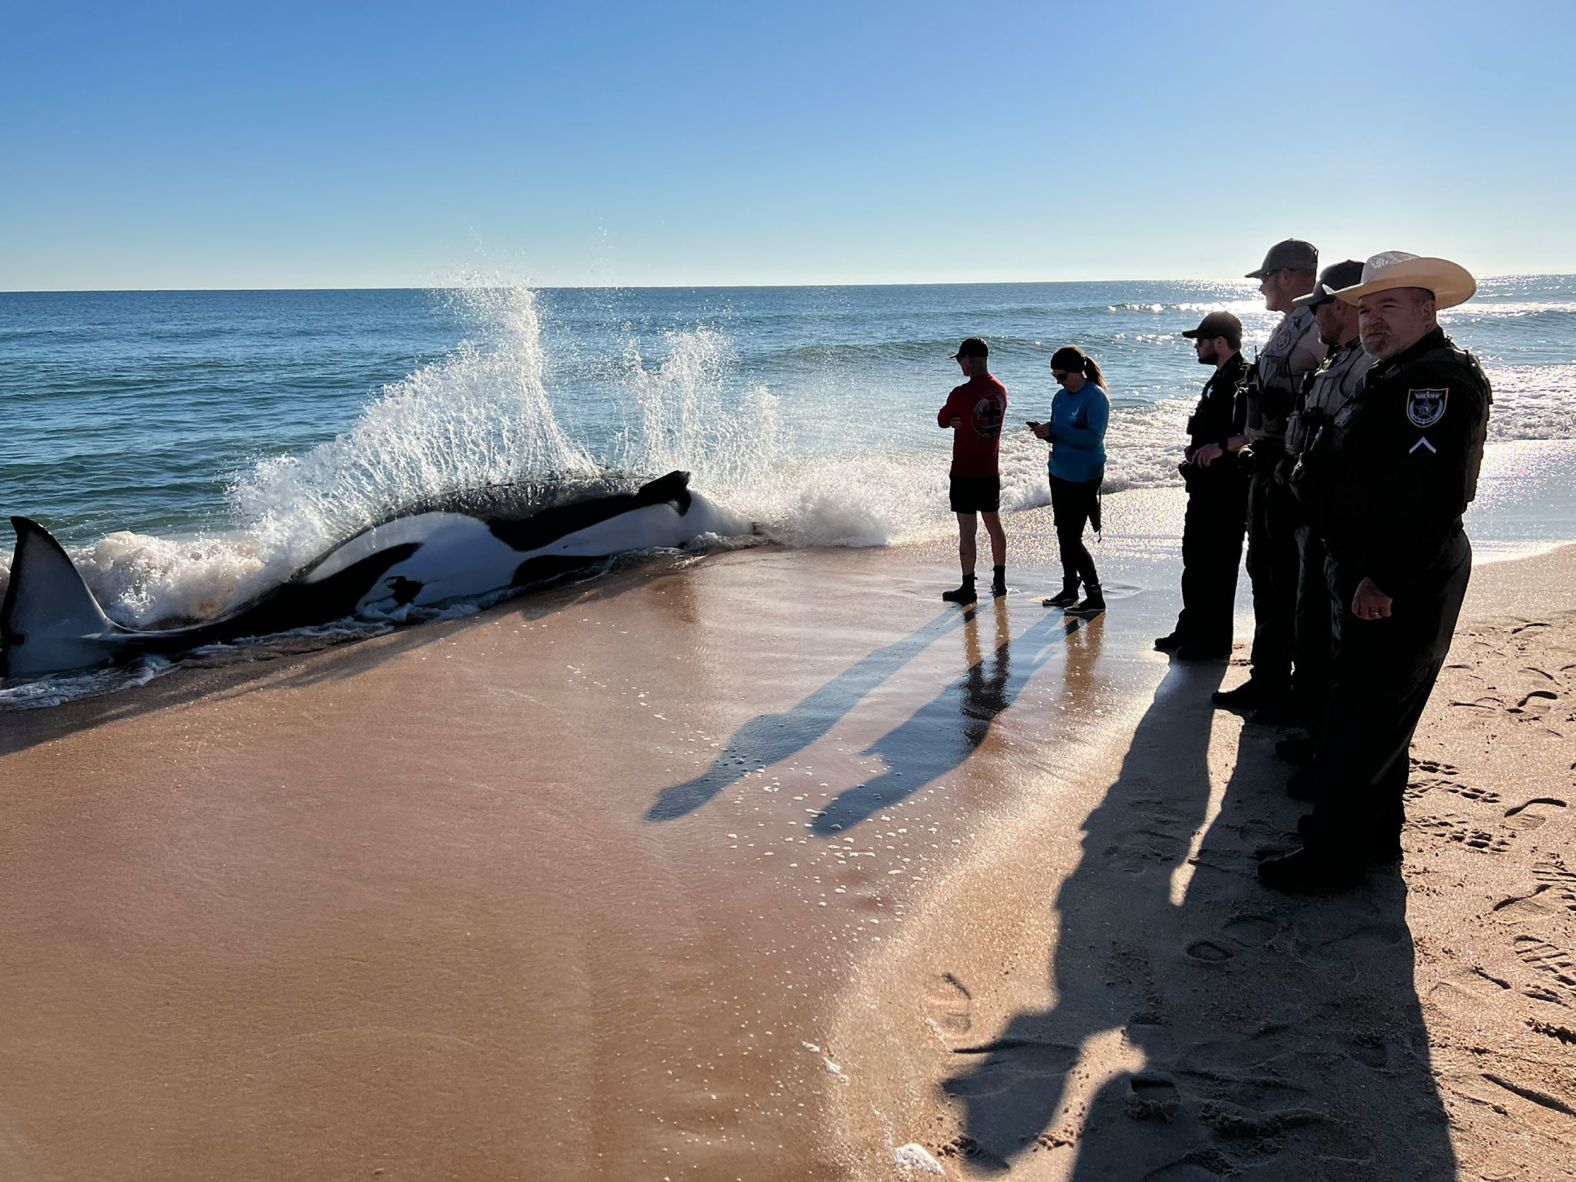 Wildlife officials investigate the <a href="index.php?page=&url=https%3A%2F%2Fwww.cnn.com%2F2023%2F01%2F11%2Fus%2Fkiller-whale-beaches-orca-florida%2Findex.html" target="_blank">death of a female orca</a>, or killer whale, that grounded itself on a beach in Palm Coast, Florida, on Wednesday, January 11.